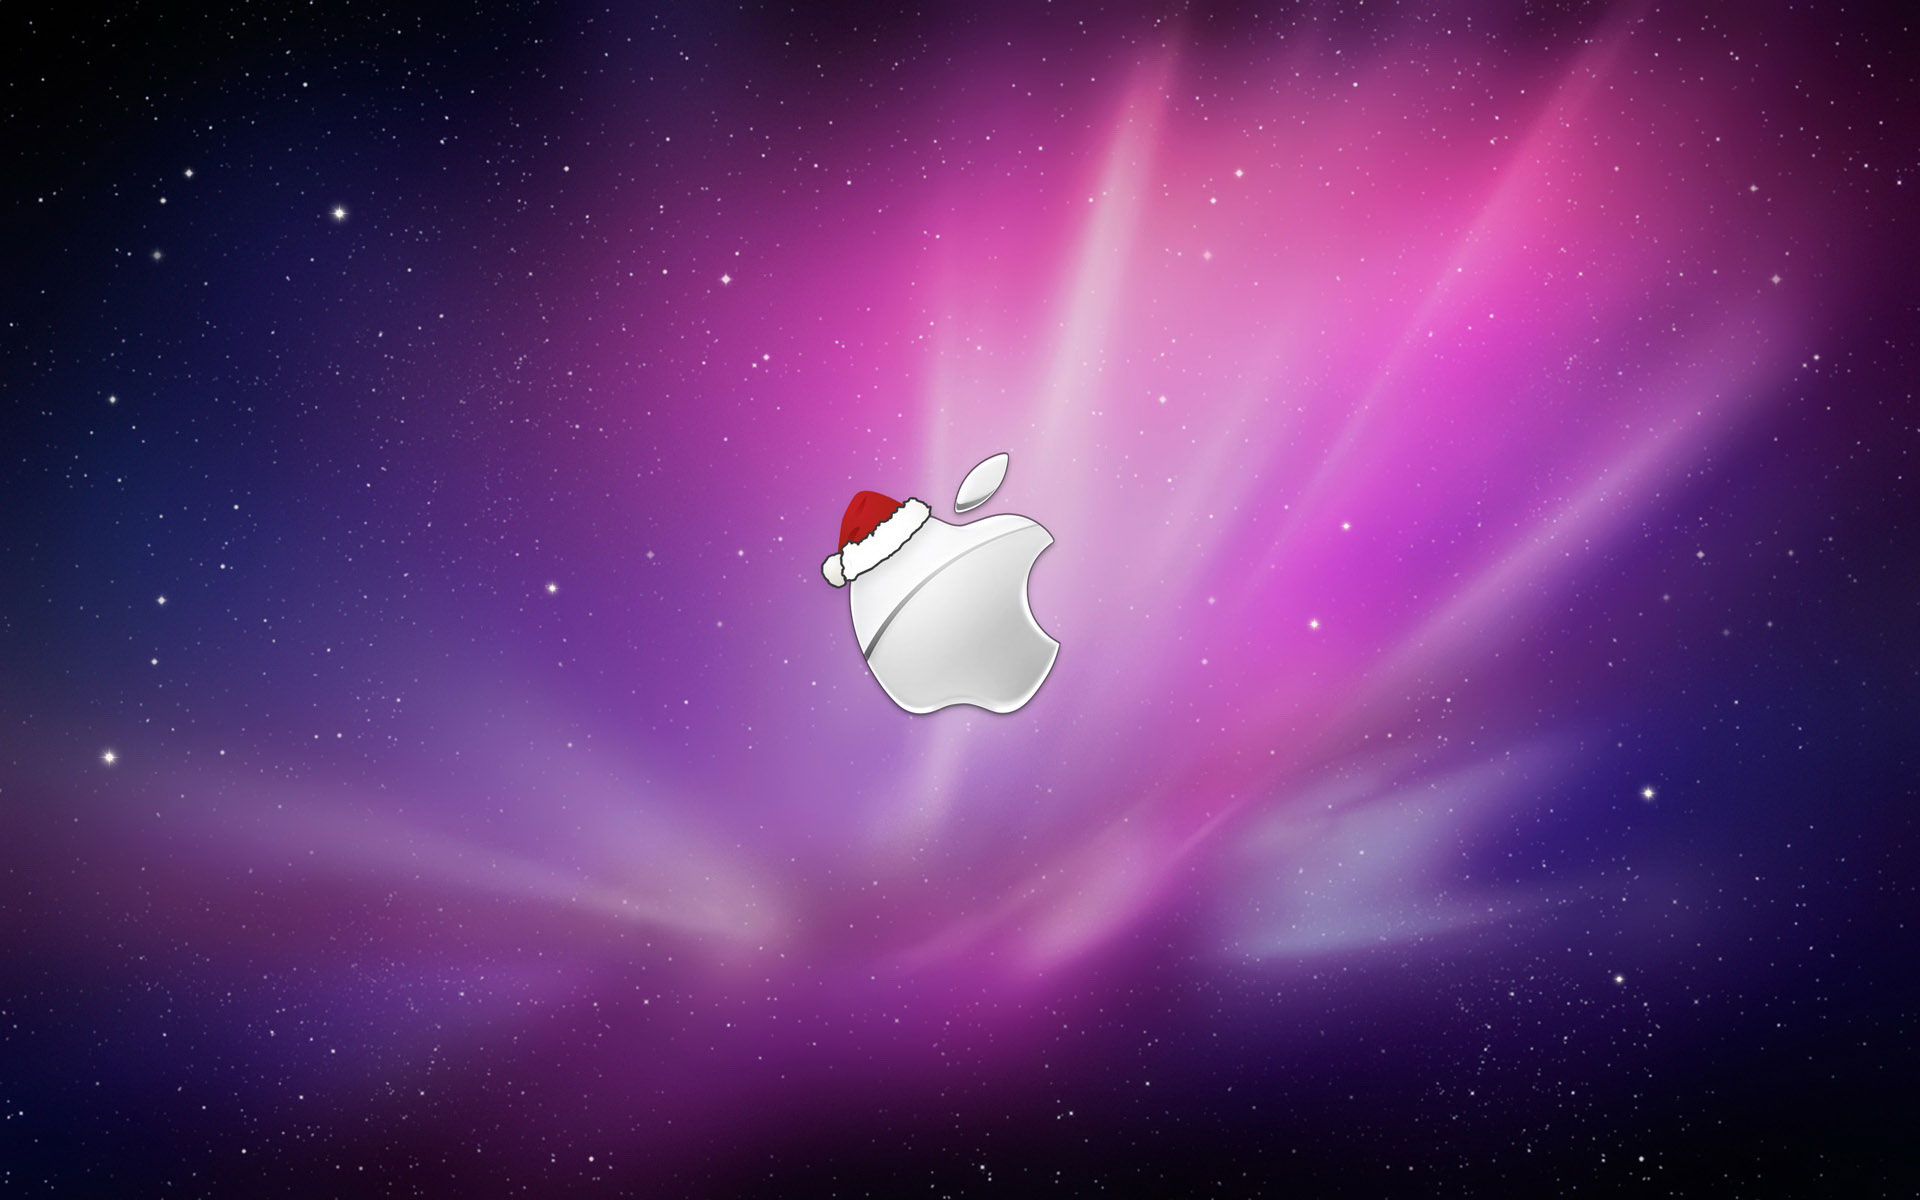 Apple Wallpaper HD | Wallpapers, Backgrounds, Images, Art Photos.